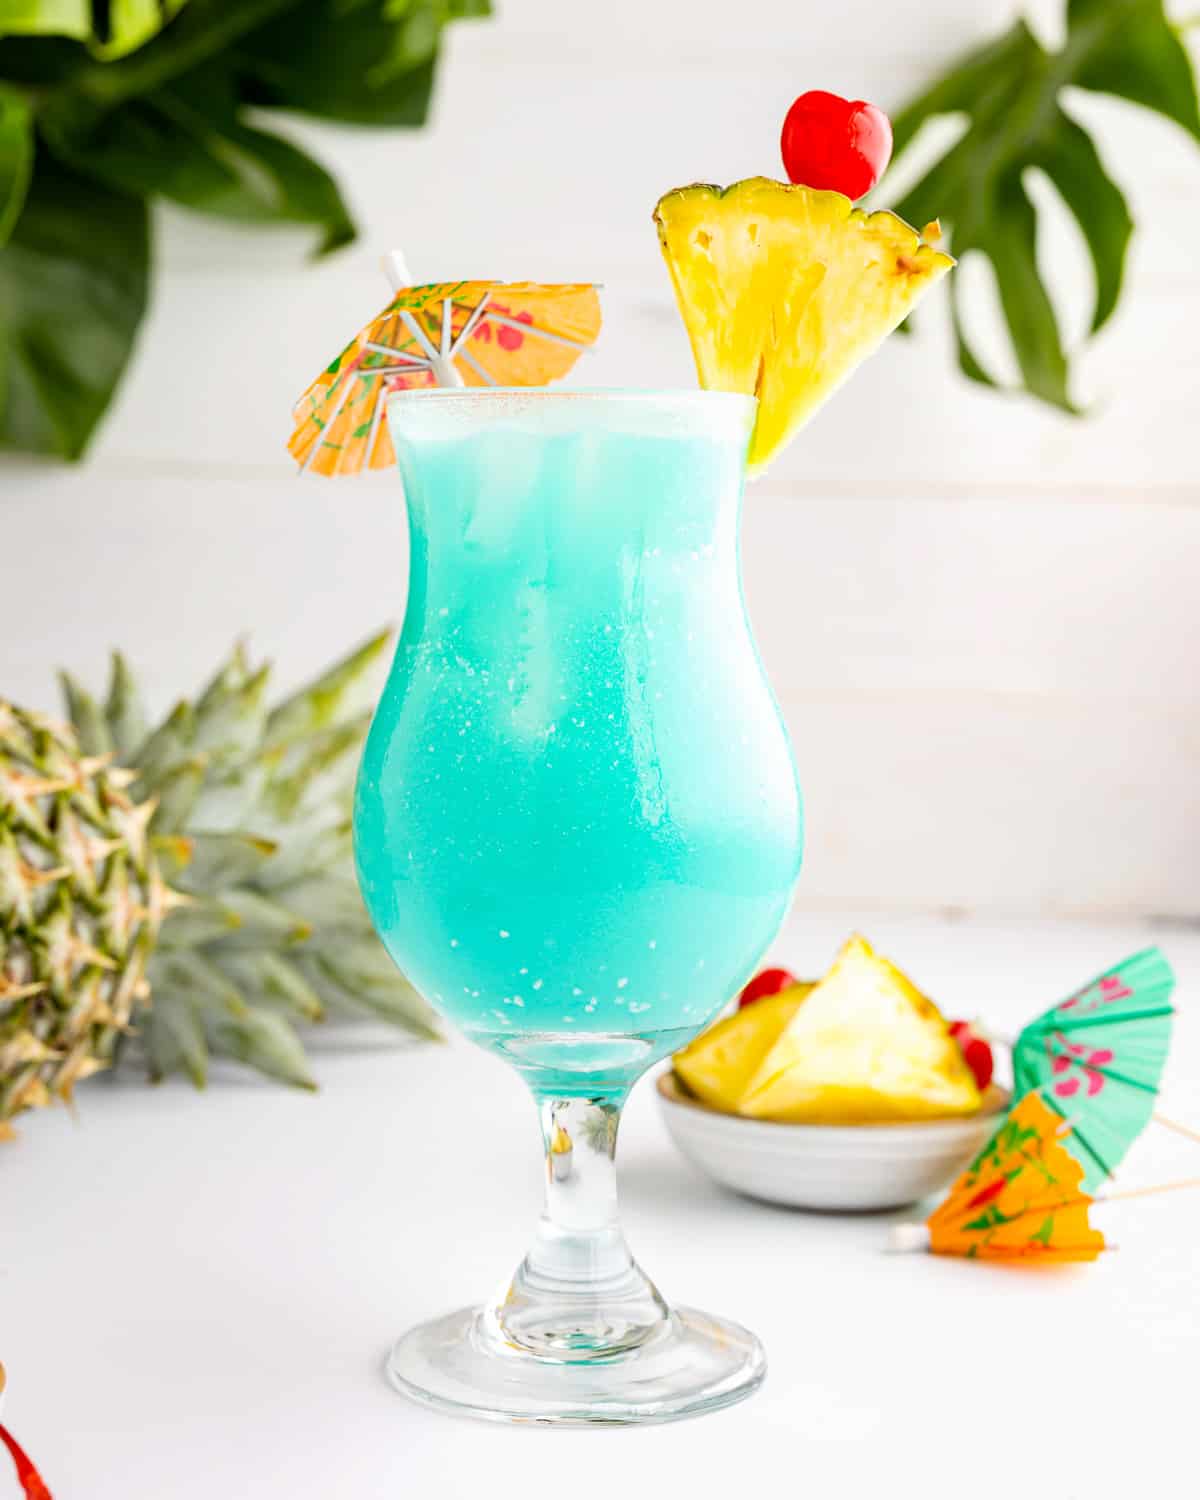 blue hawaiian cocktail with pineapples and decorative umbrellas.